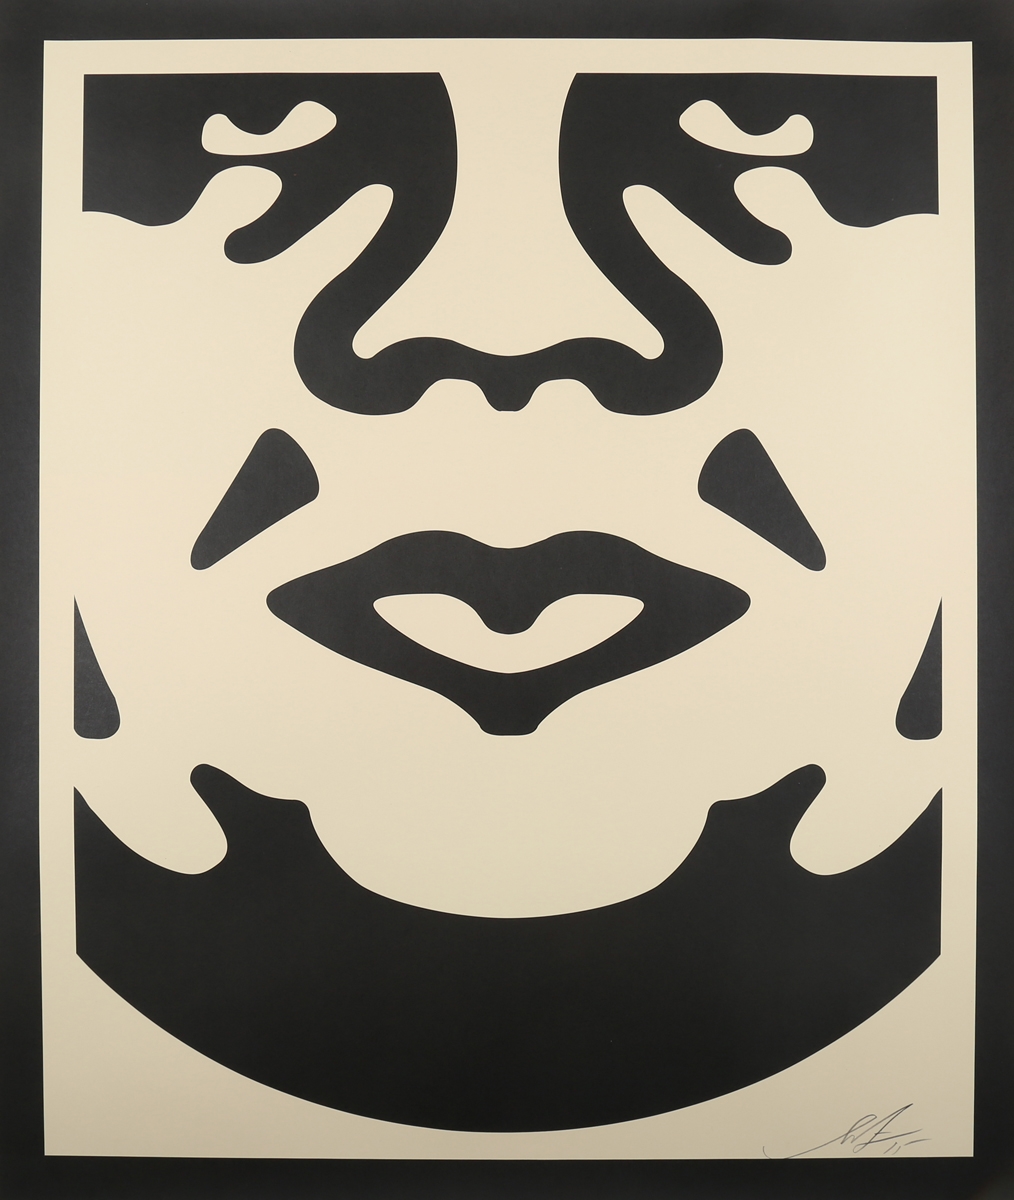 Obey (Andre the Giant Stencil) by Shepard Fairey, dated 2015